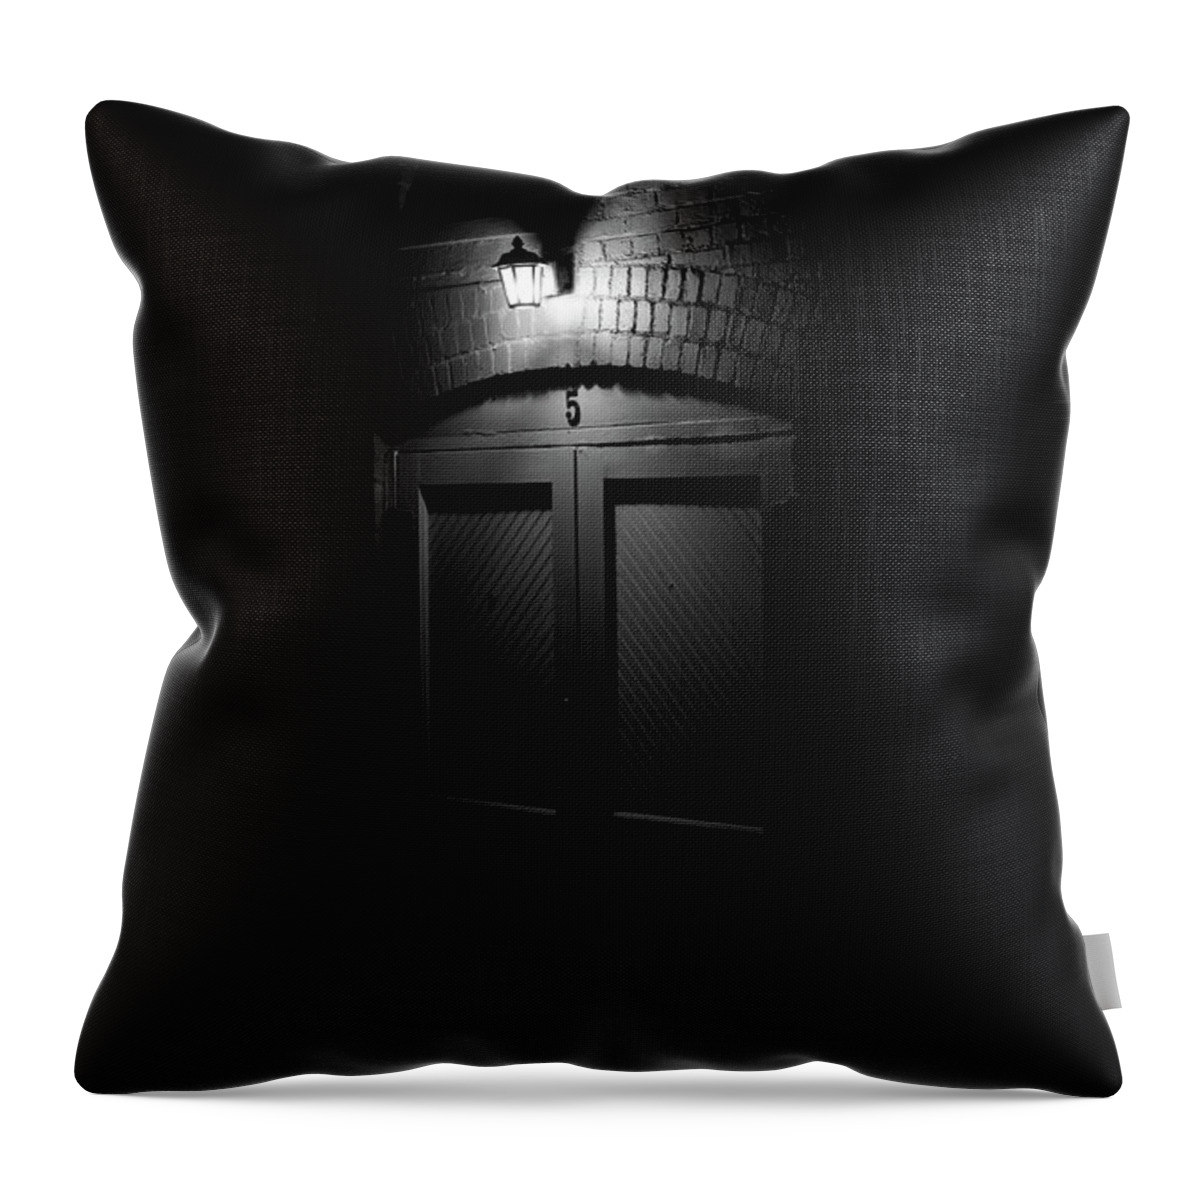 Black And White Throw Pillow featuring the photograph Door Number 5 by Karen Harrison Brown